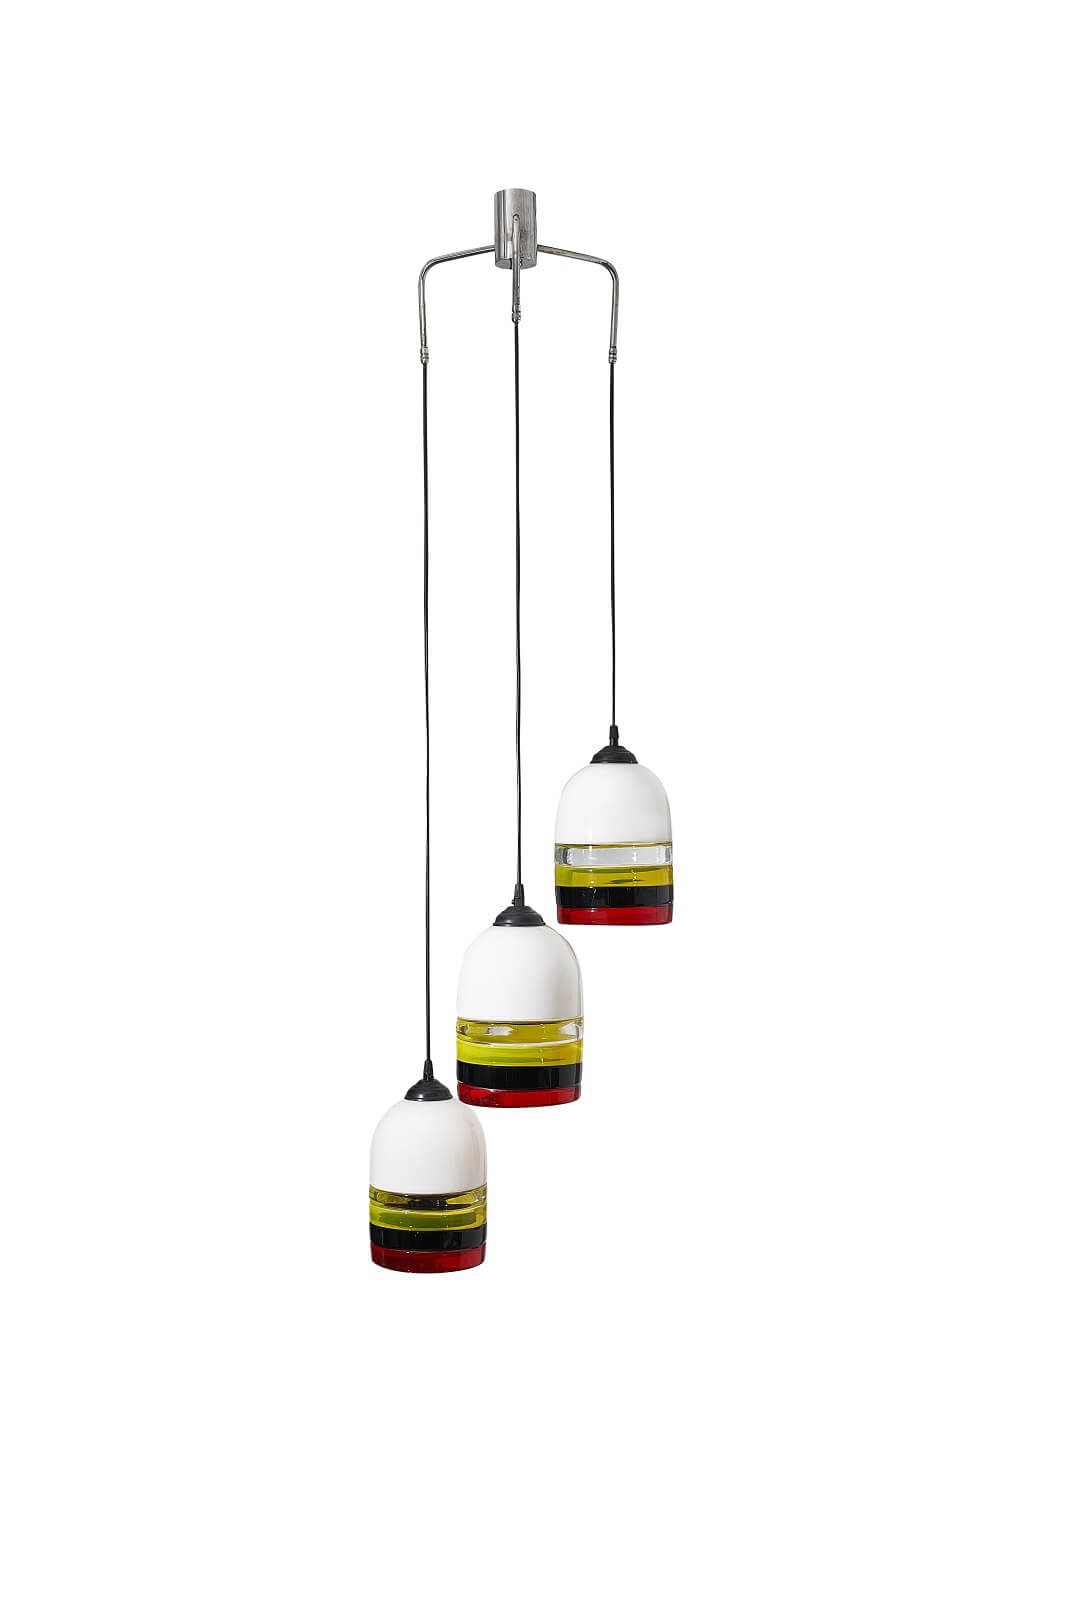 Ceiling lamp by Leucos for sale